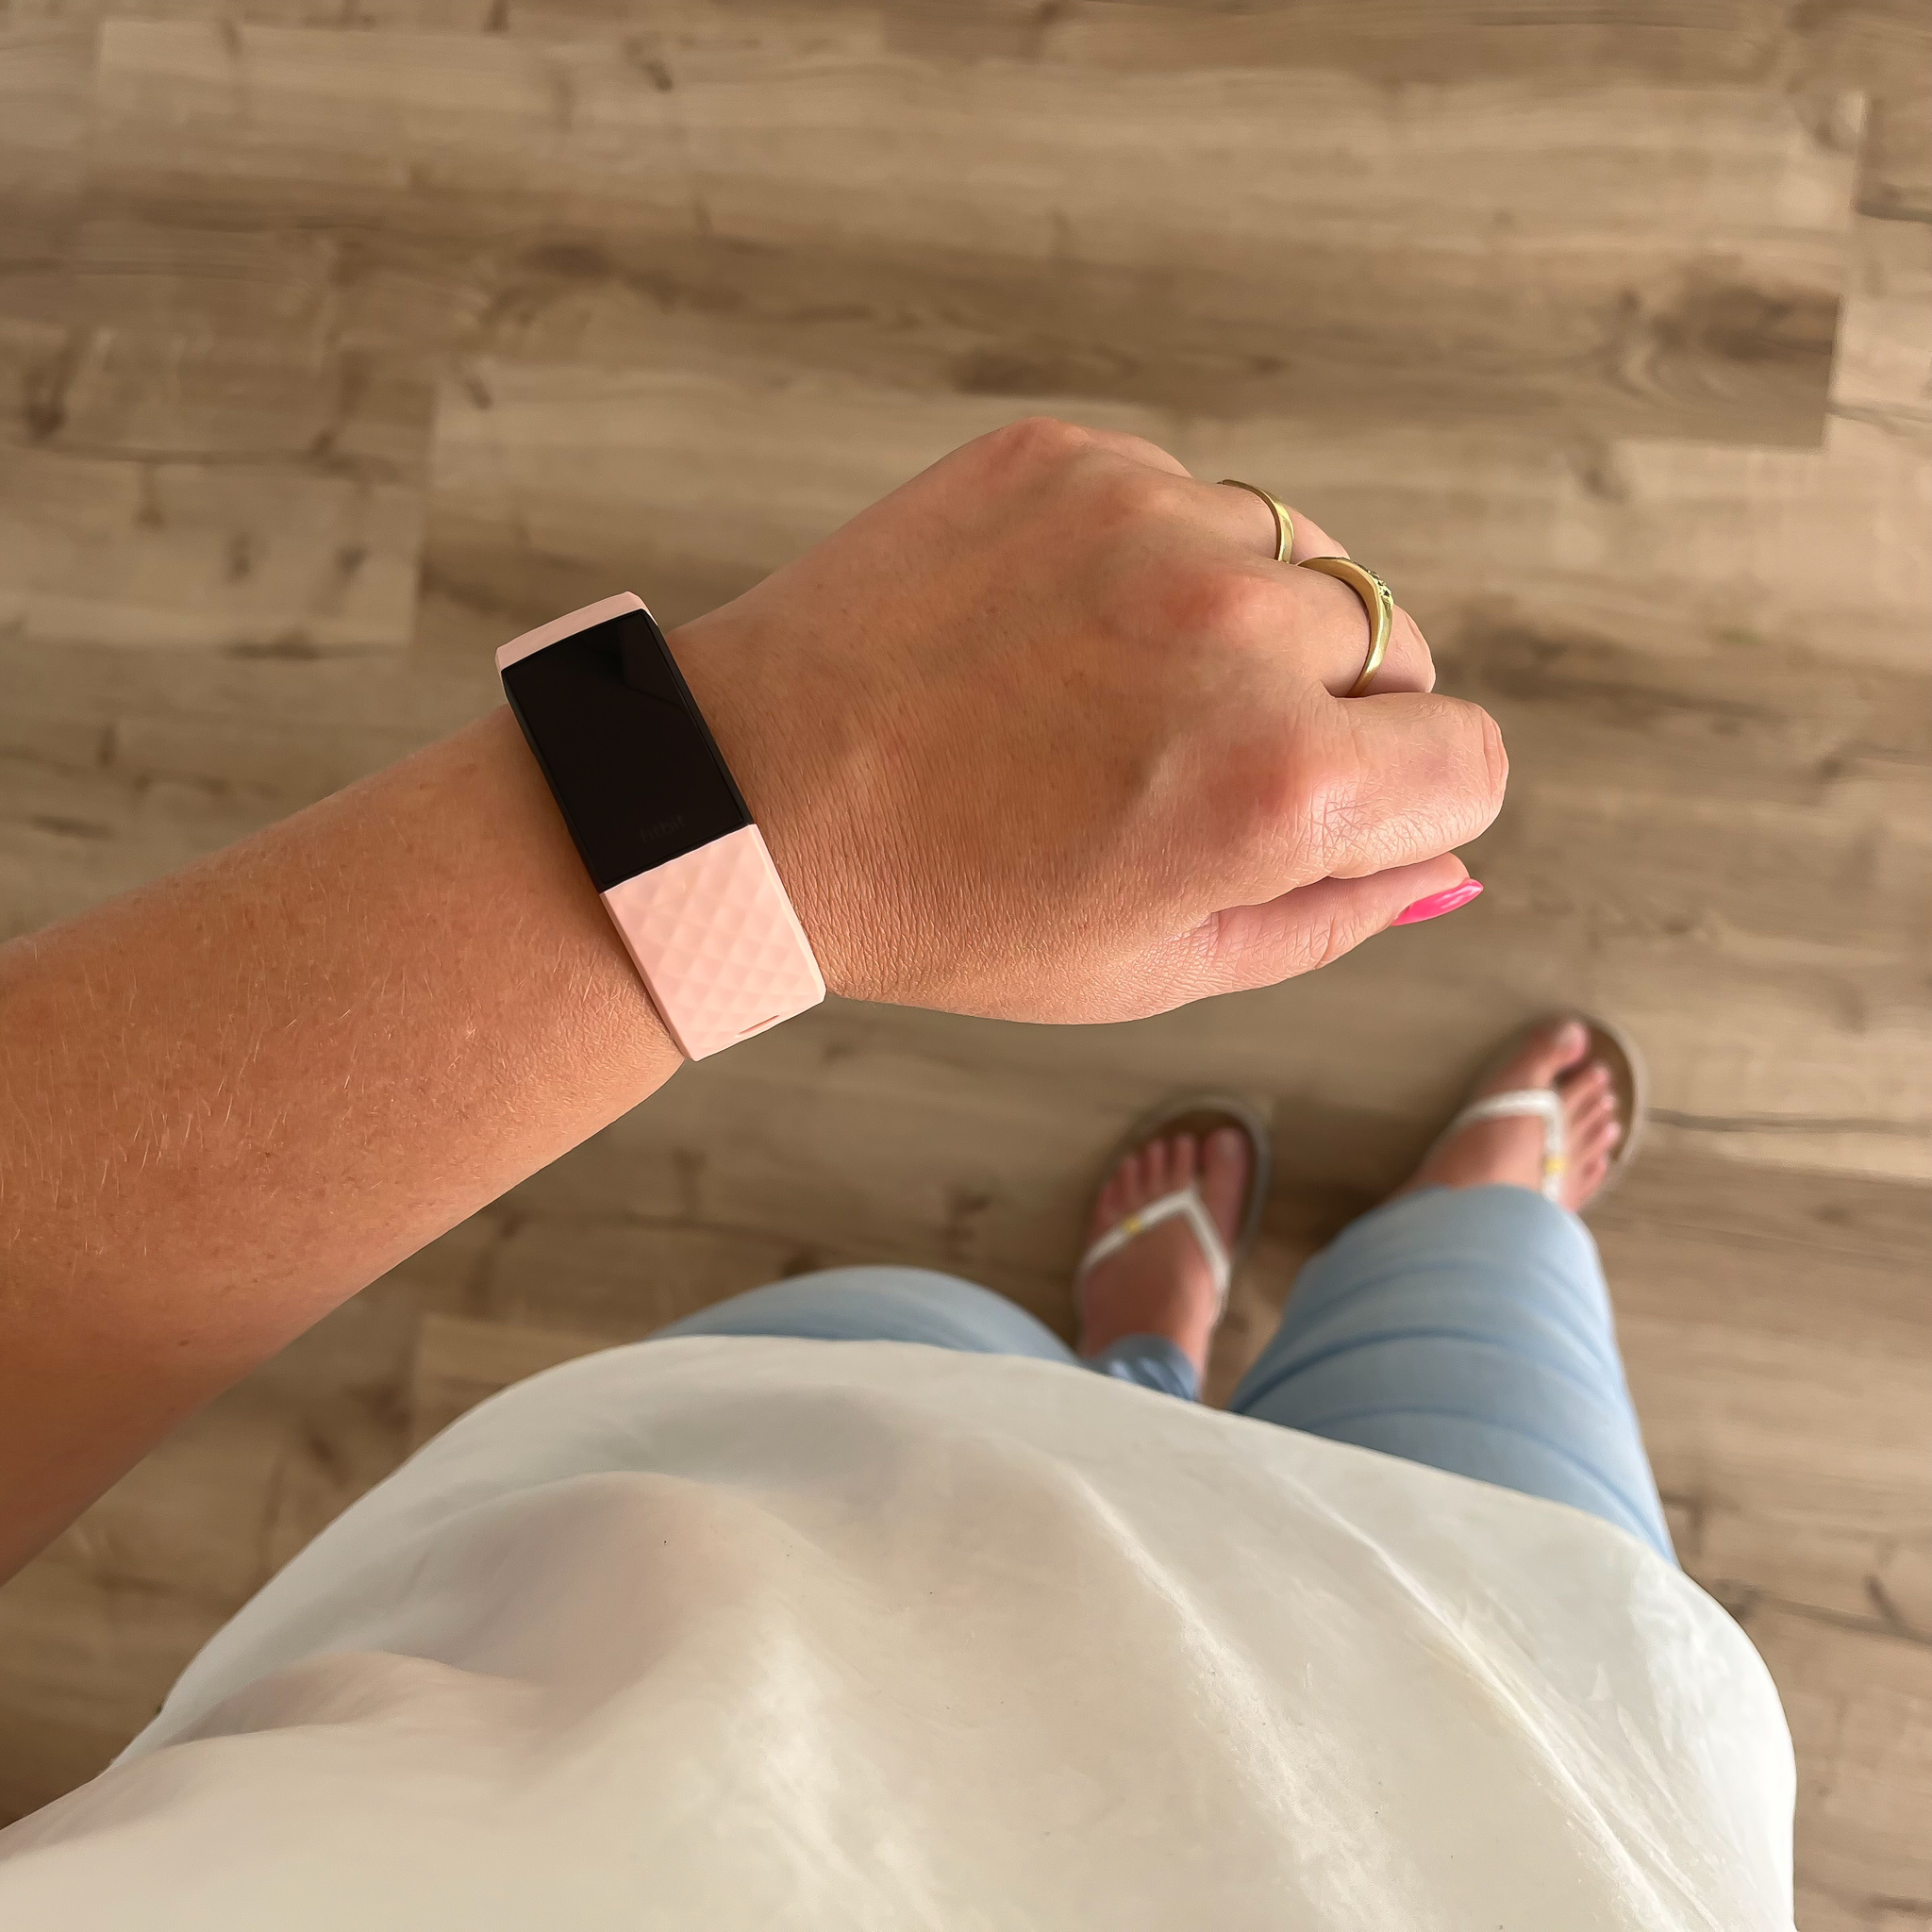 Fitbit Charge 3 & 4 Sport Waffelband - rosa